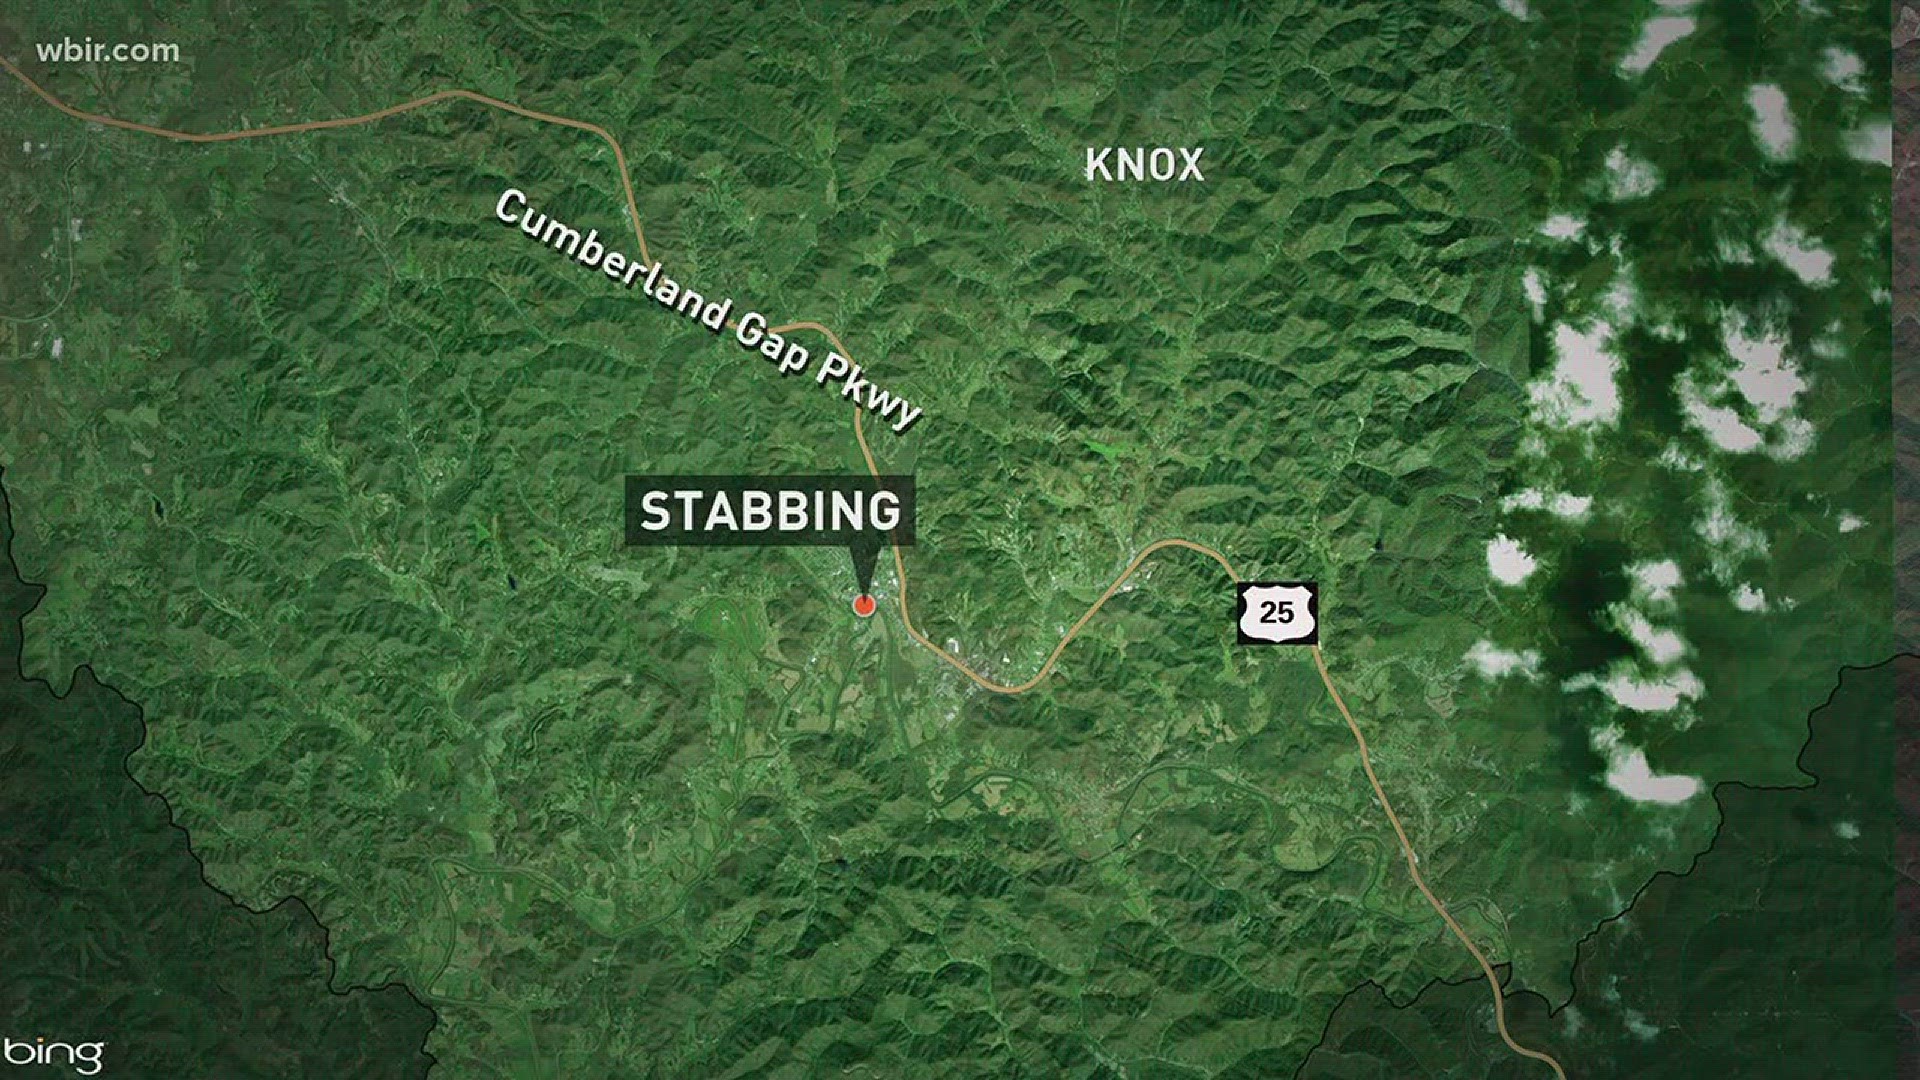 Nov. 24, 2017: A Kentucky man faces attempted murder and kidnapping charges after authorities found a woman with dozens of stab wounds.